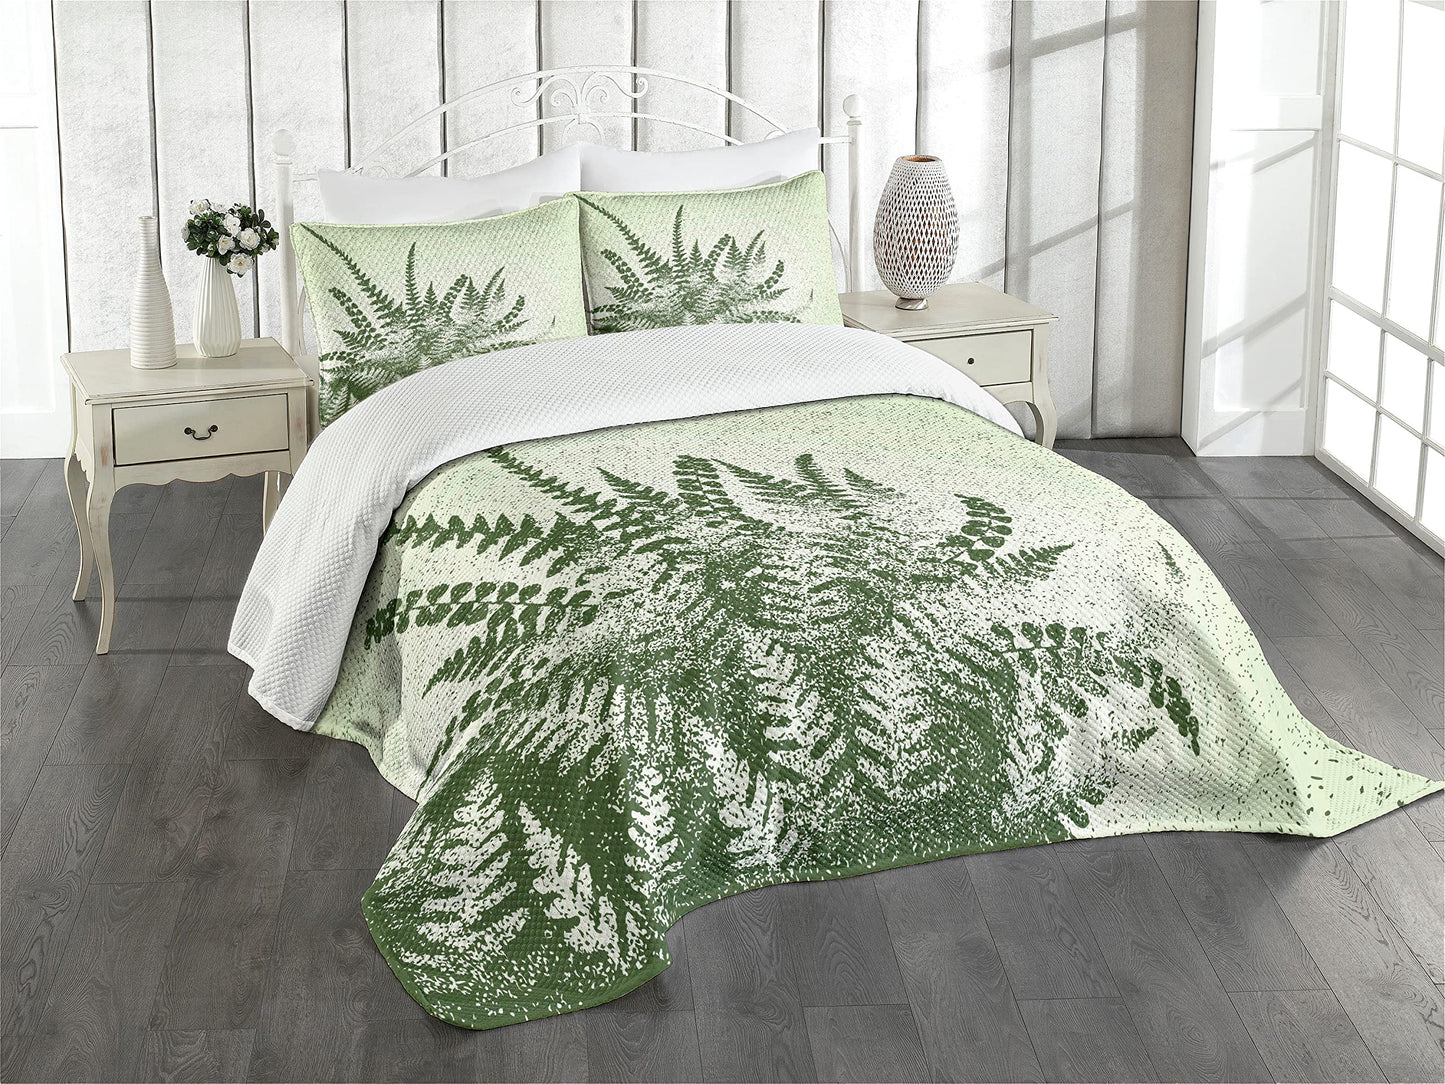 Lunarable Green Bedspread, Nature Botanic Exotic Plants Silhouette Fern Leaves with Grungy Effect, Decorative Quilted 3 Piece Coverlet Set with 2 Pillow Shams, Queen Size, Pale Green Olive Green